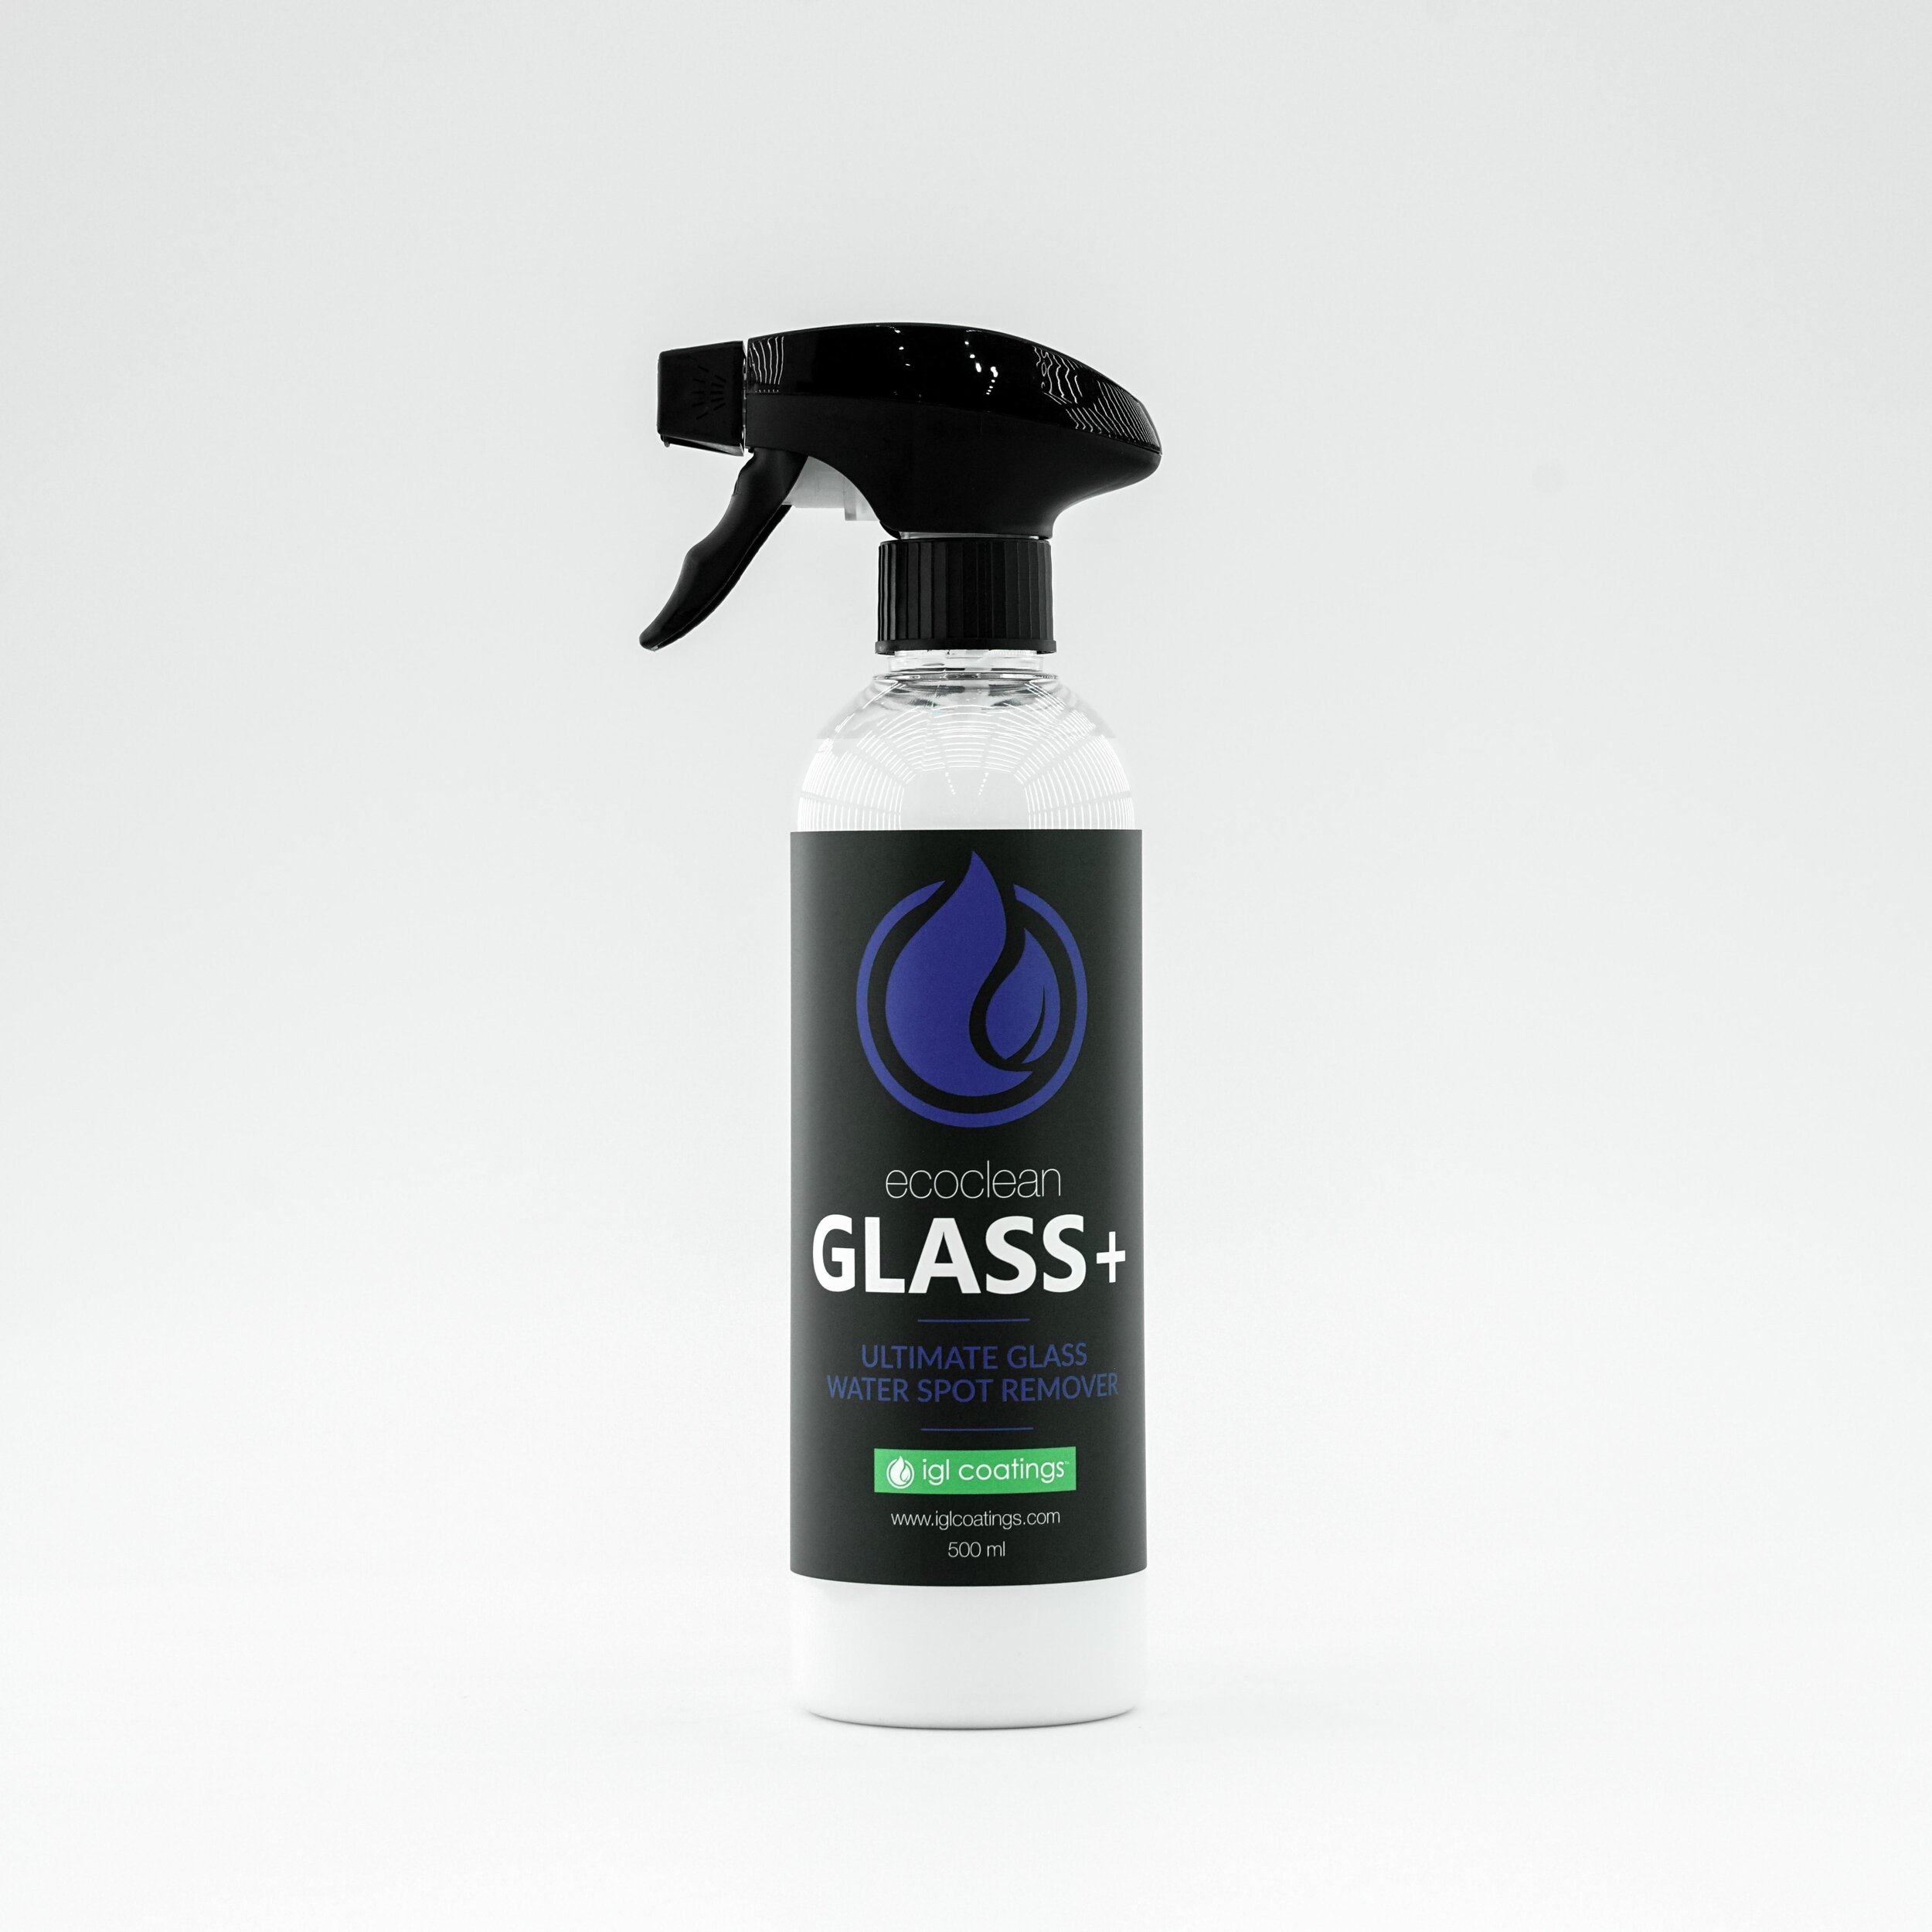 ECOCLEAN GLASS+